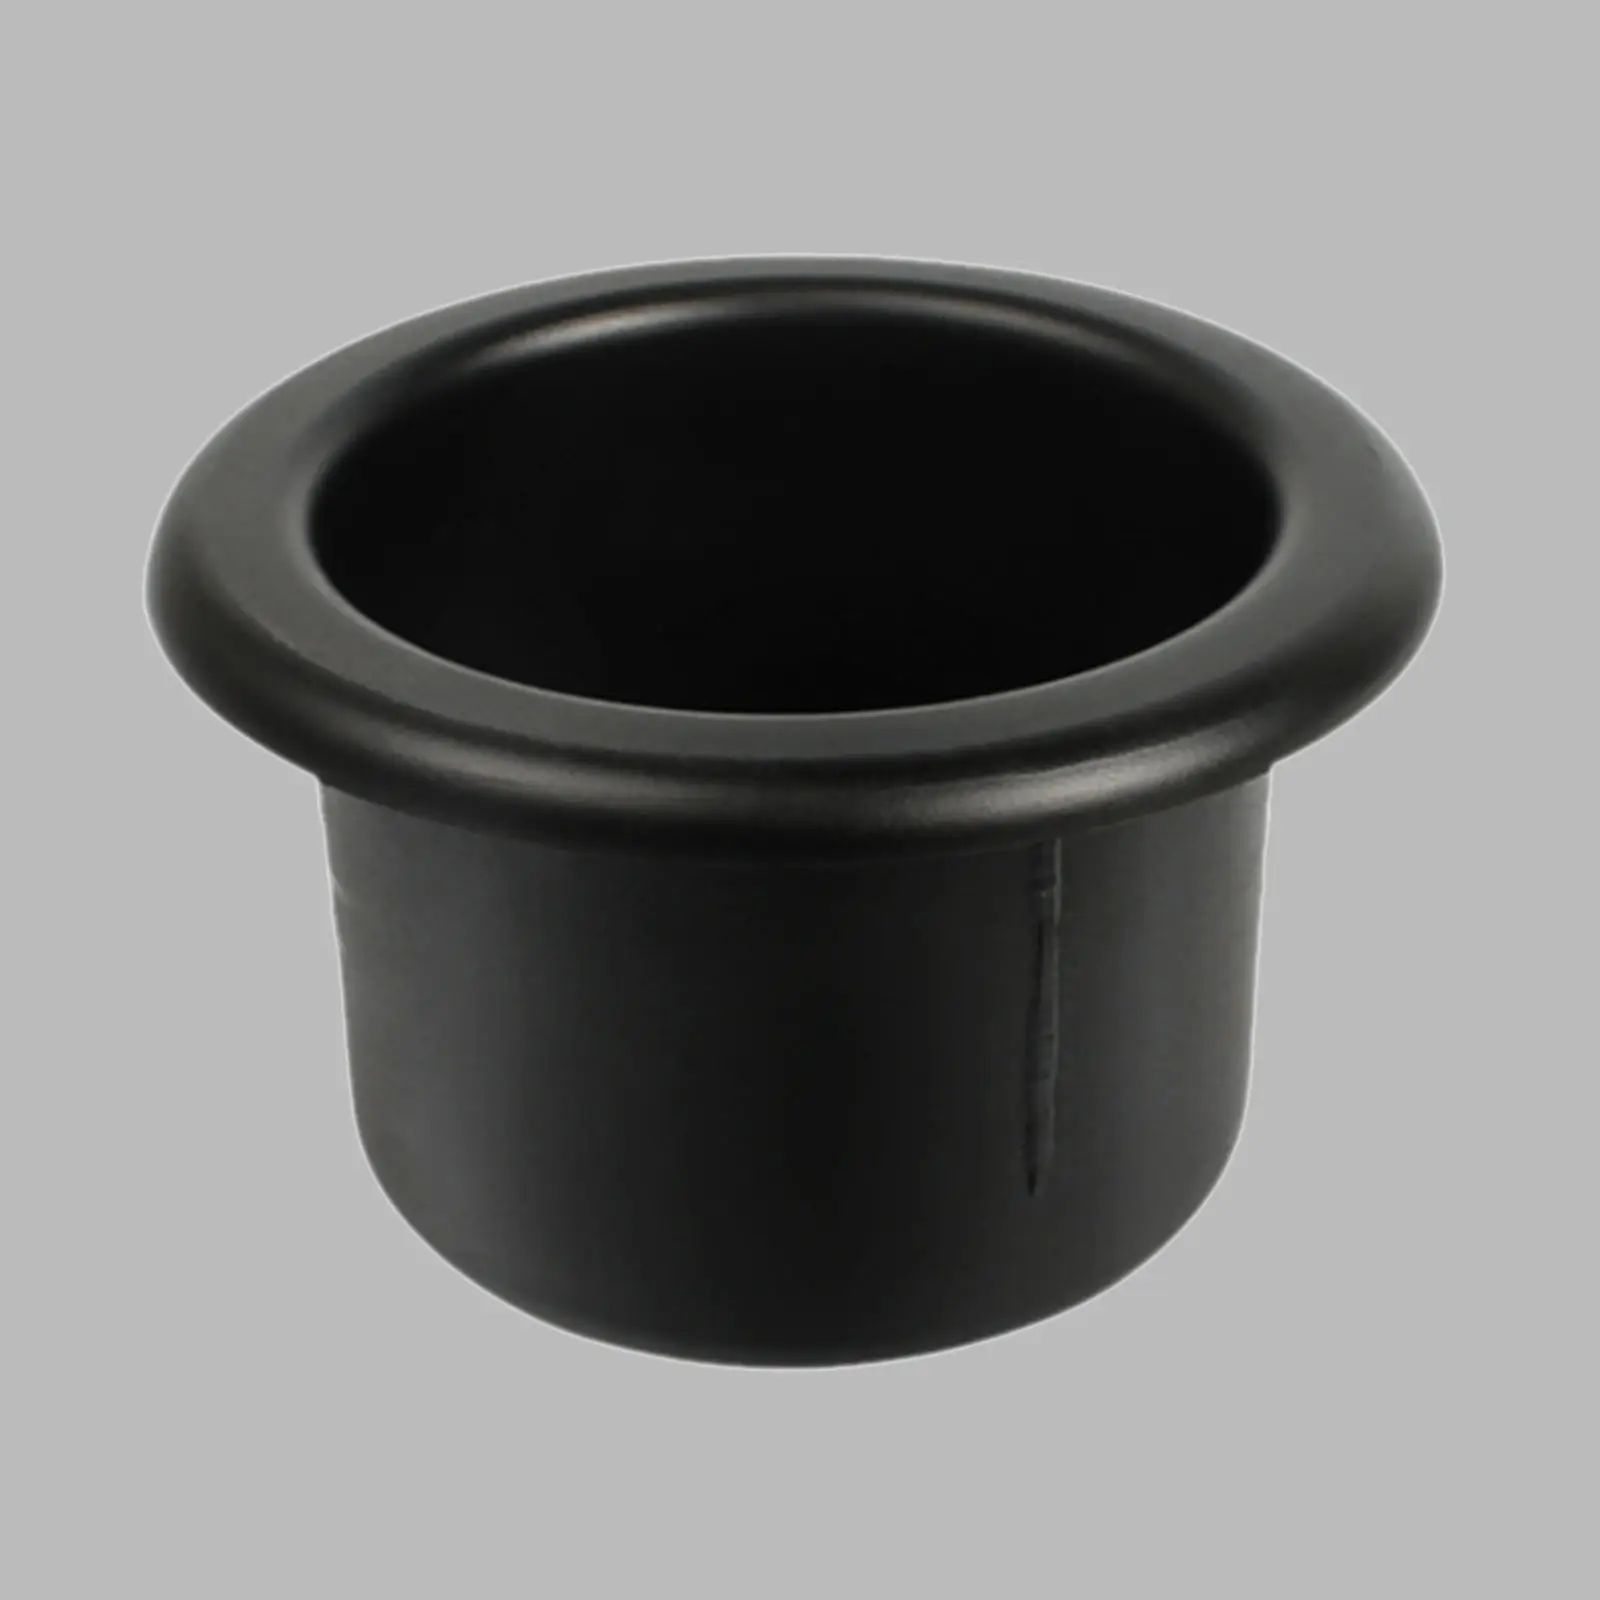 Universal Black Plastic Cup Drink Can Holder 100mm Dia for Boat Marine RV